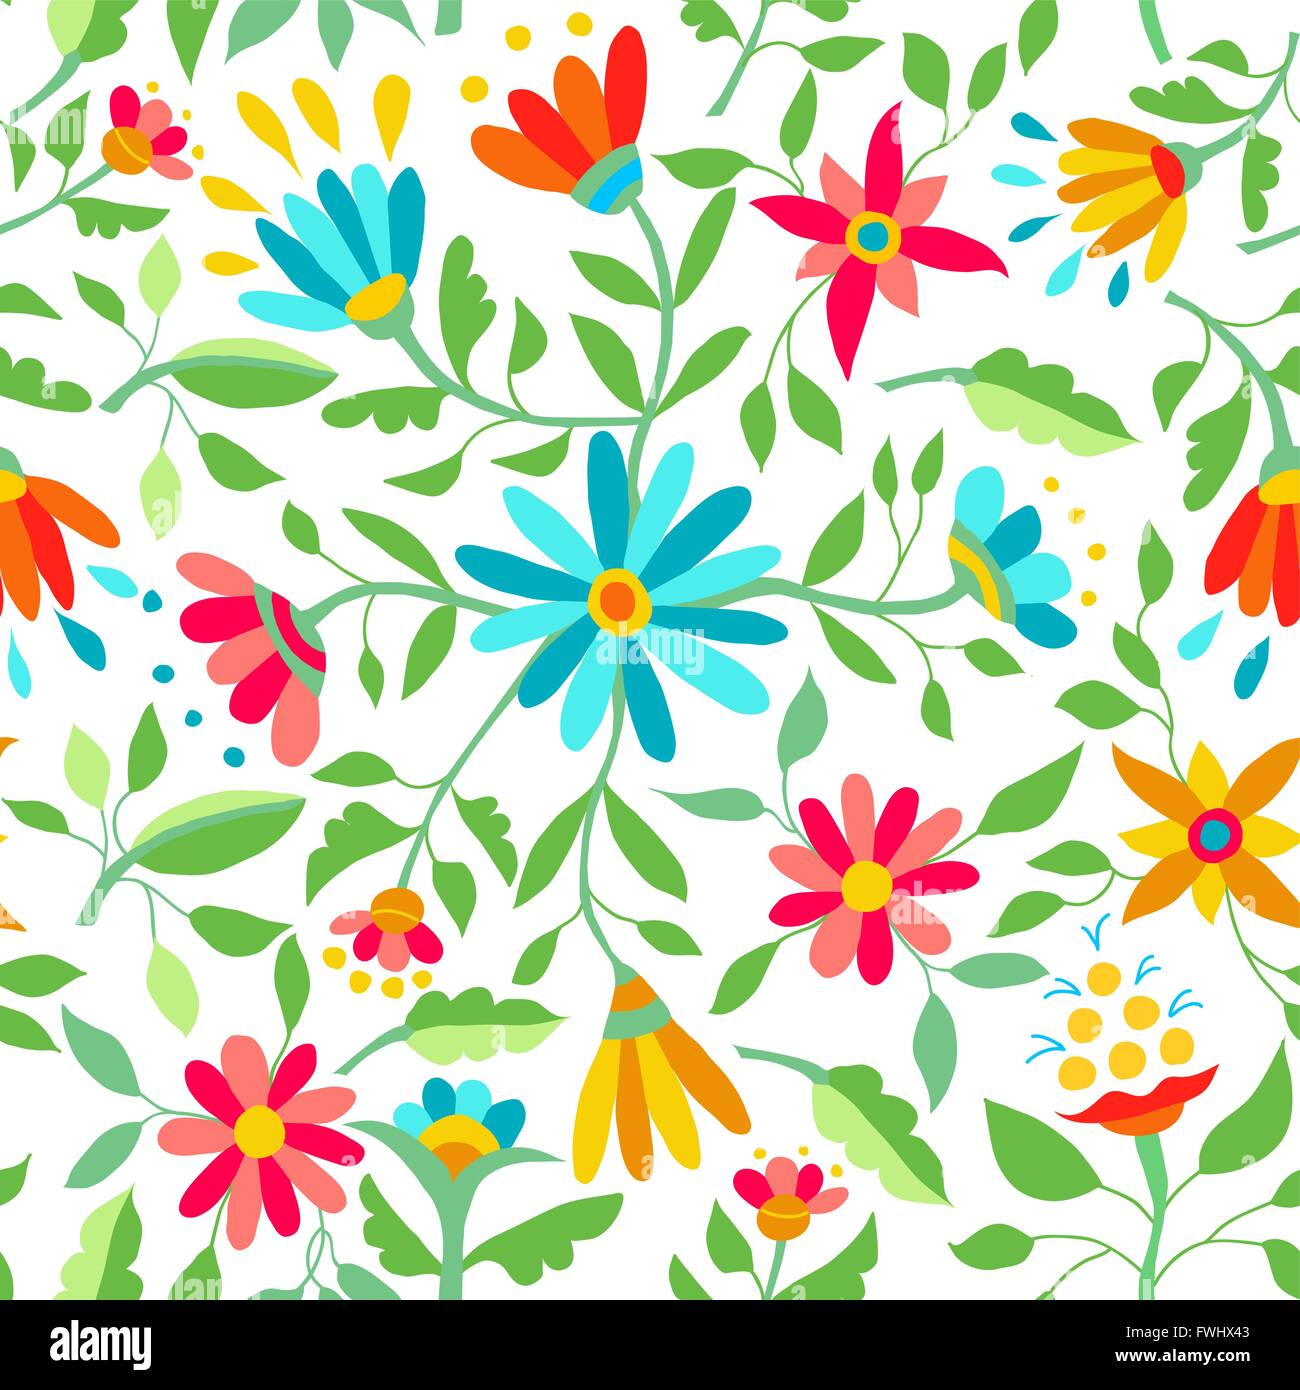 Spring floral seamless pattern background illustration. Vibrant colored flowers with leaves and garden design elements. EPS10 ve Stock Vector